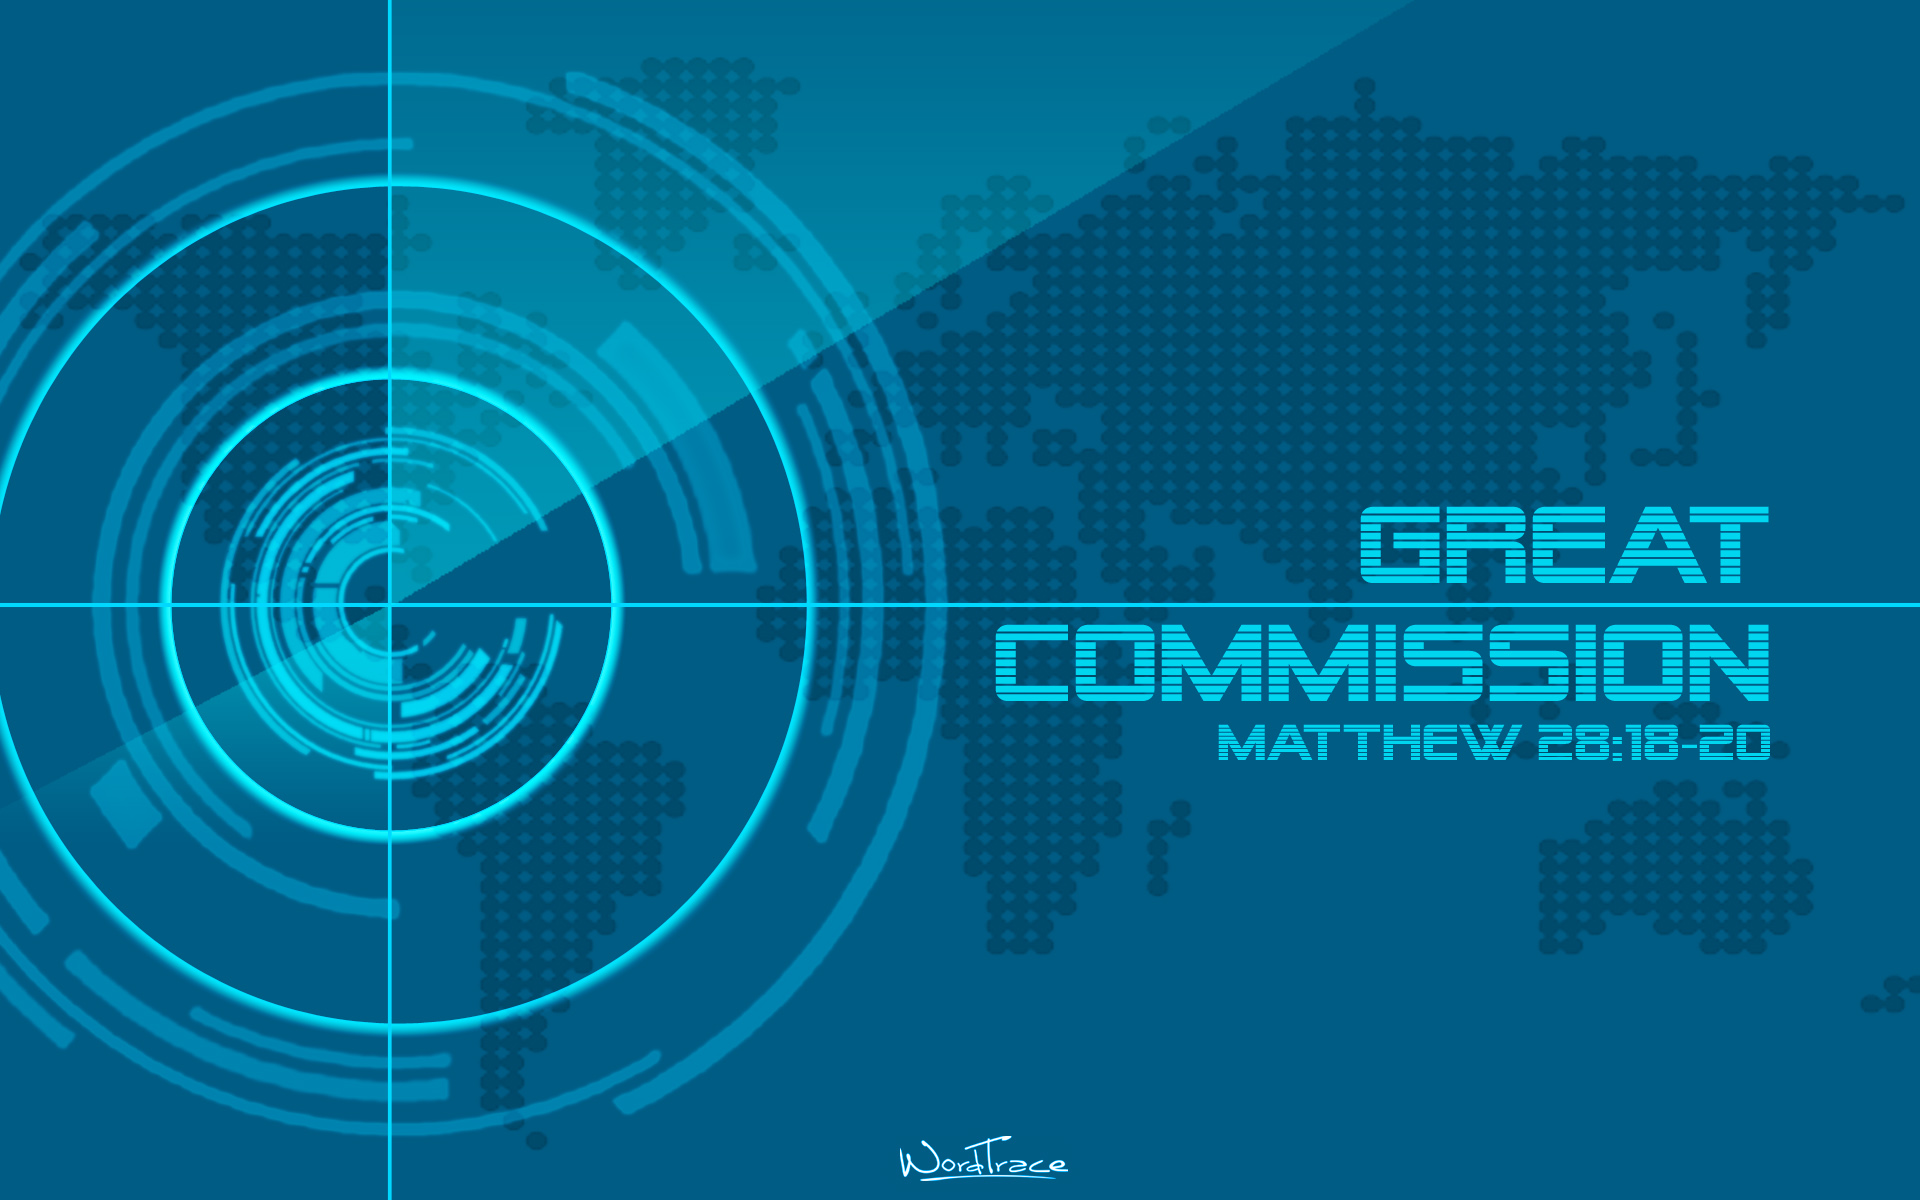 March 10 - Great Commission , HD Wallpaper & Backgrounds